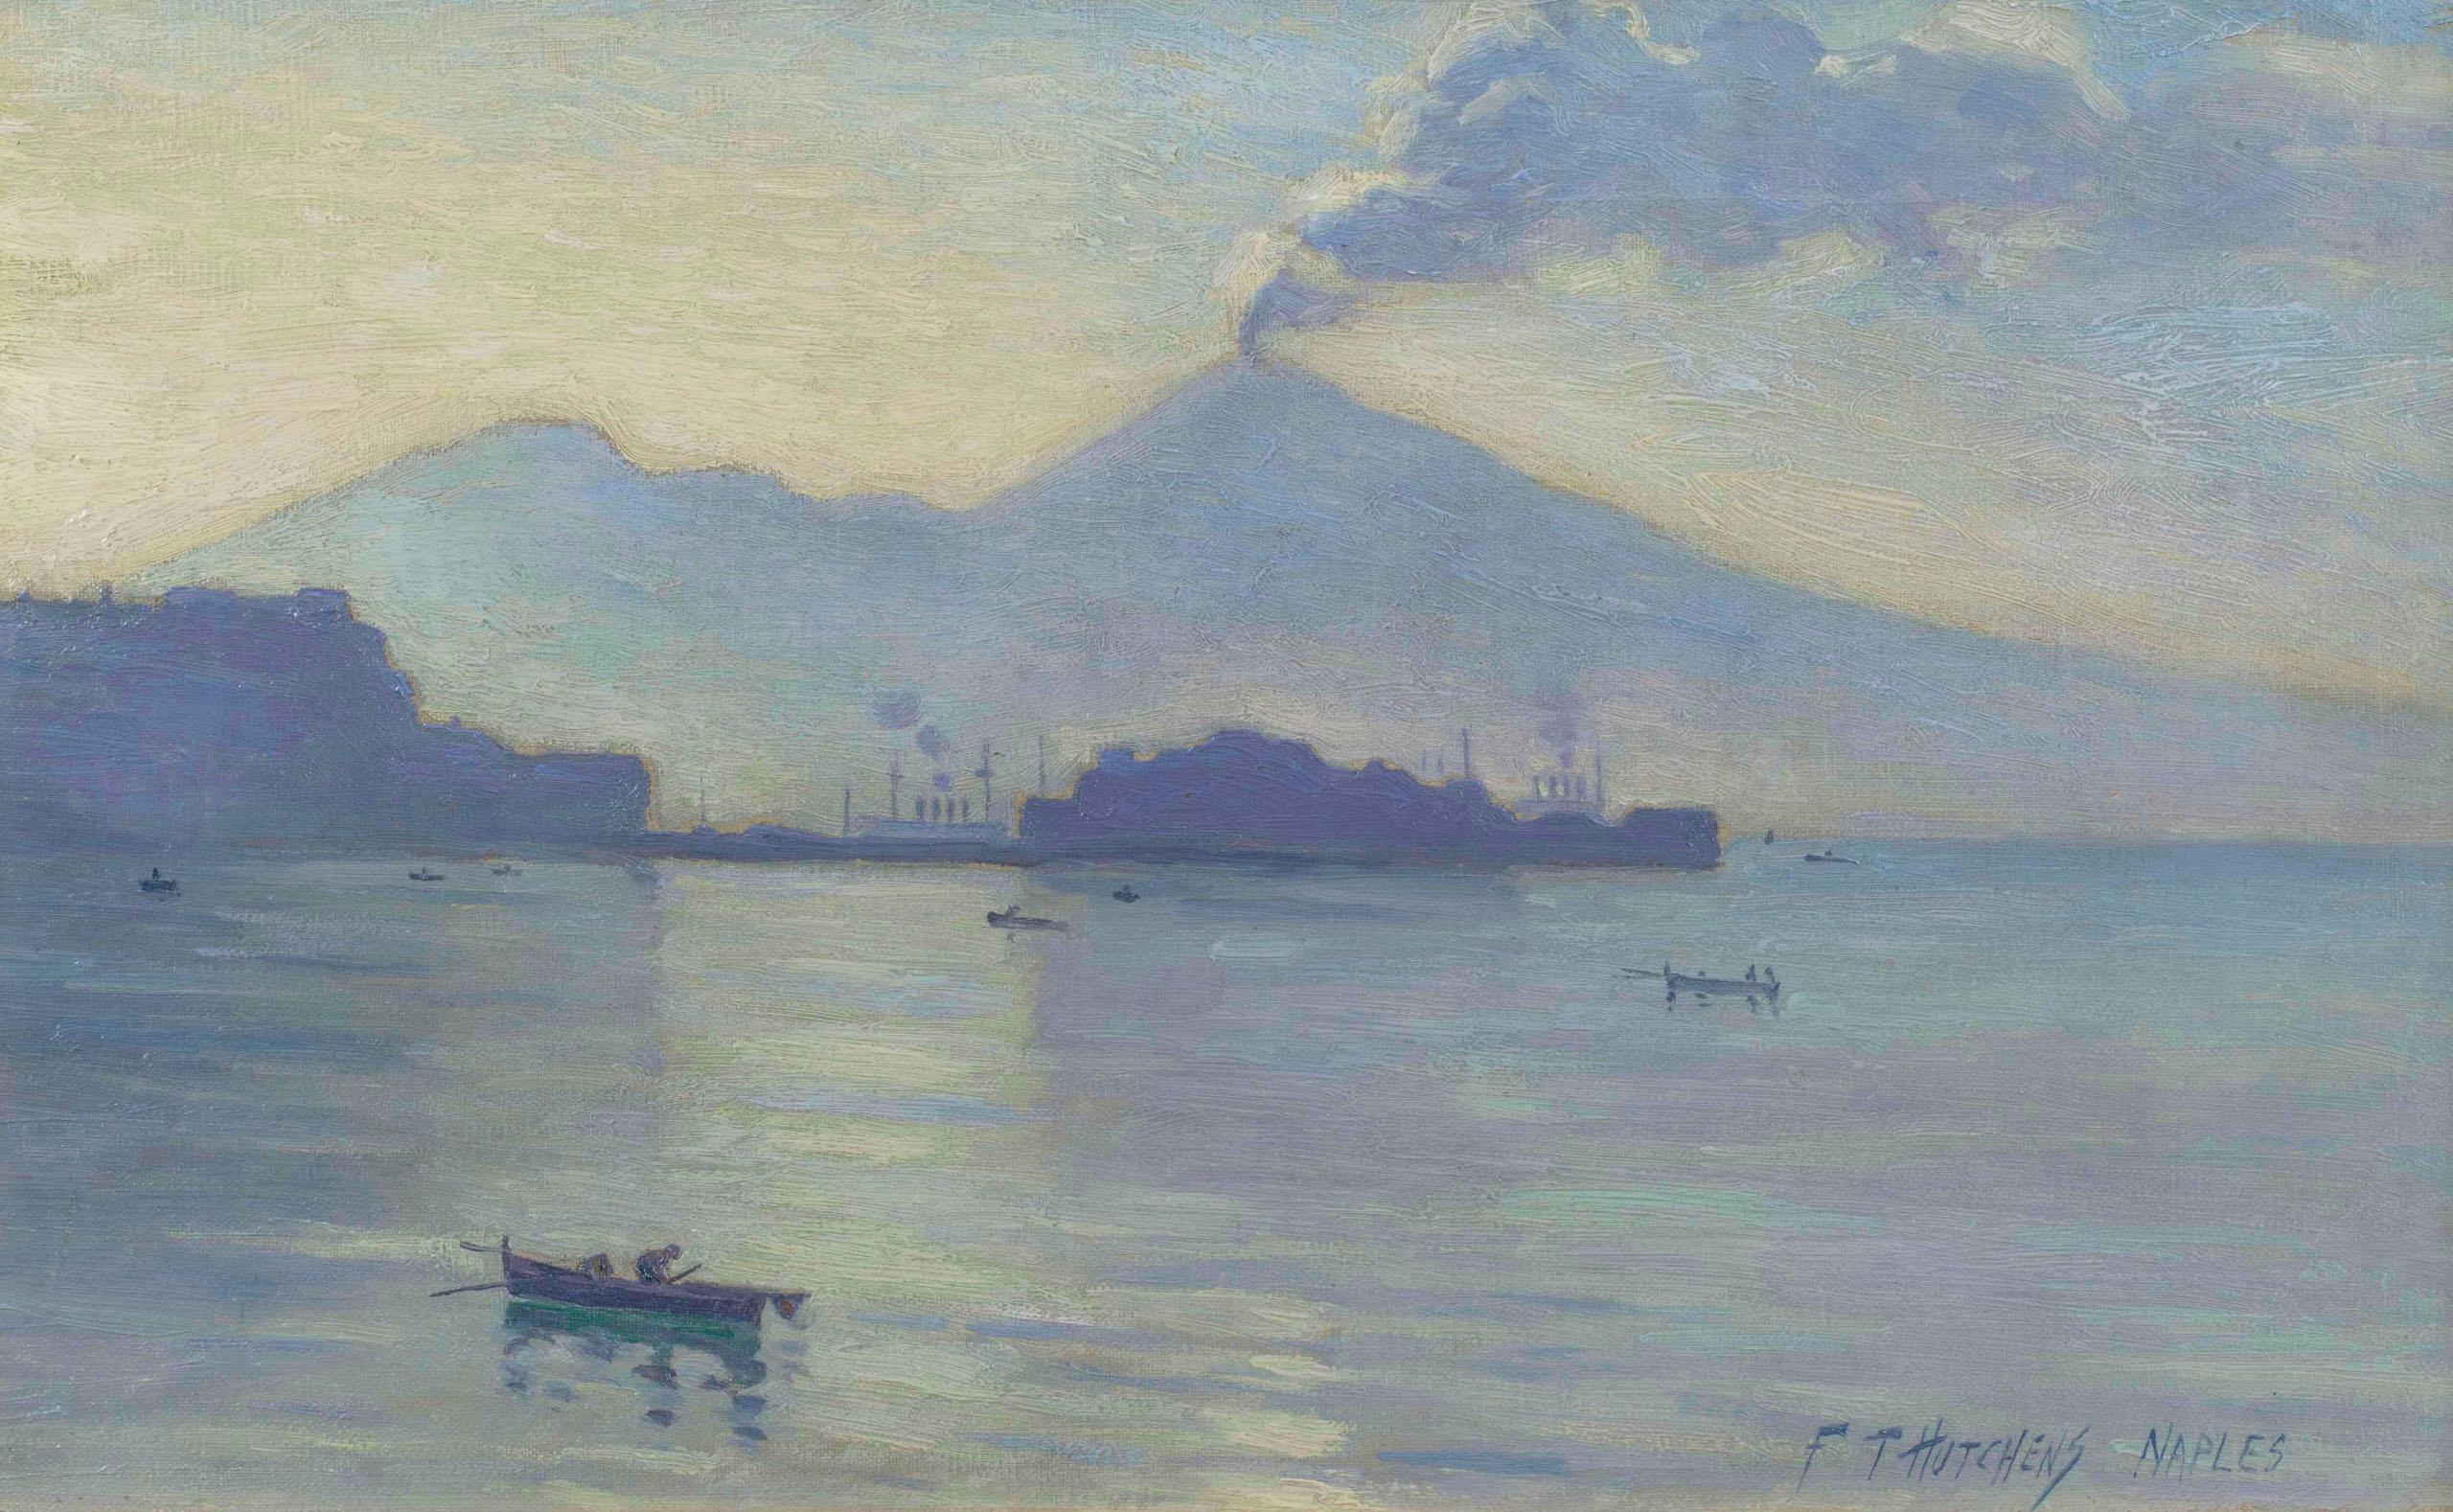 Naples, View of Mt. Vesuvius by Frank Townsend Hutchens (1869-1937, American)

Frank Townsend Hutchens (1869-1937)
Naples
Oil on canvas
10 x 16 inches
Signed lower right

